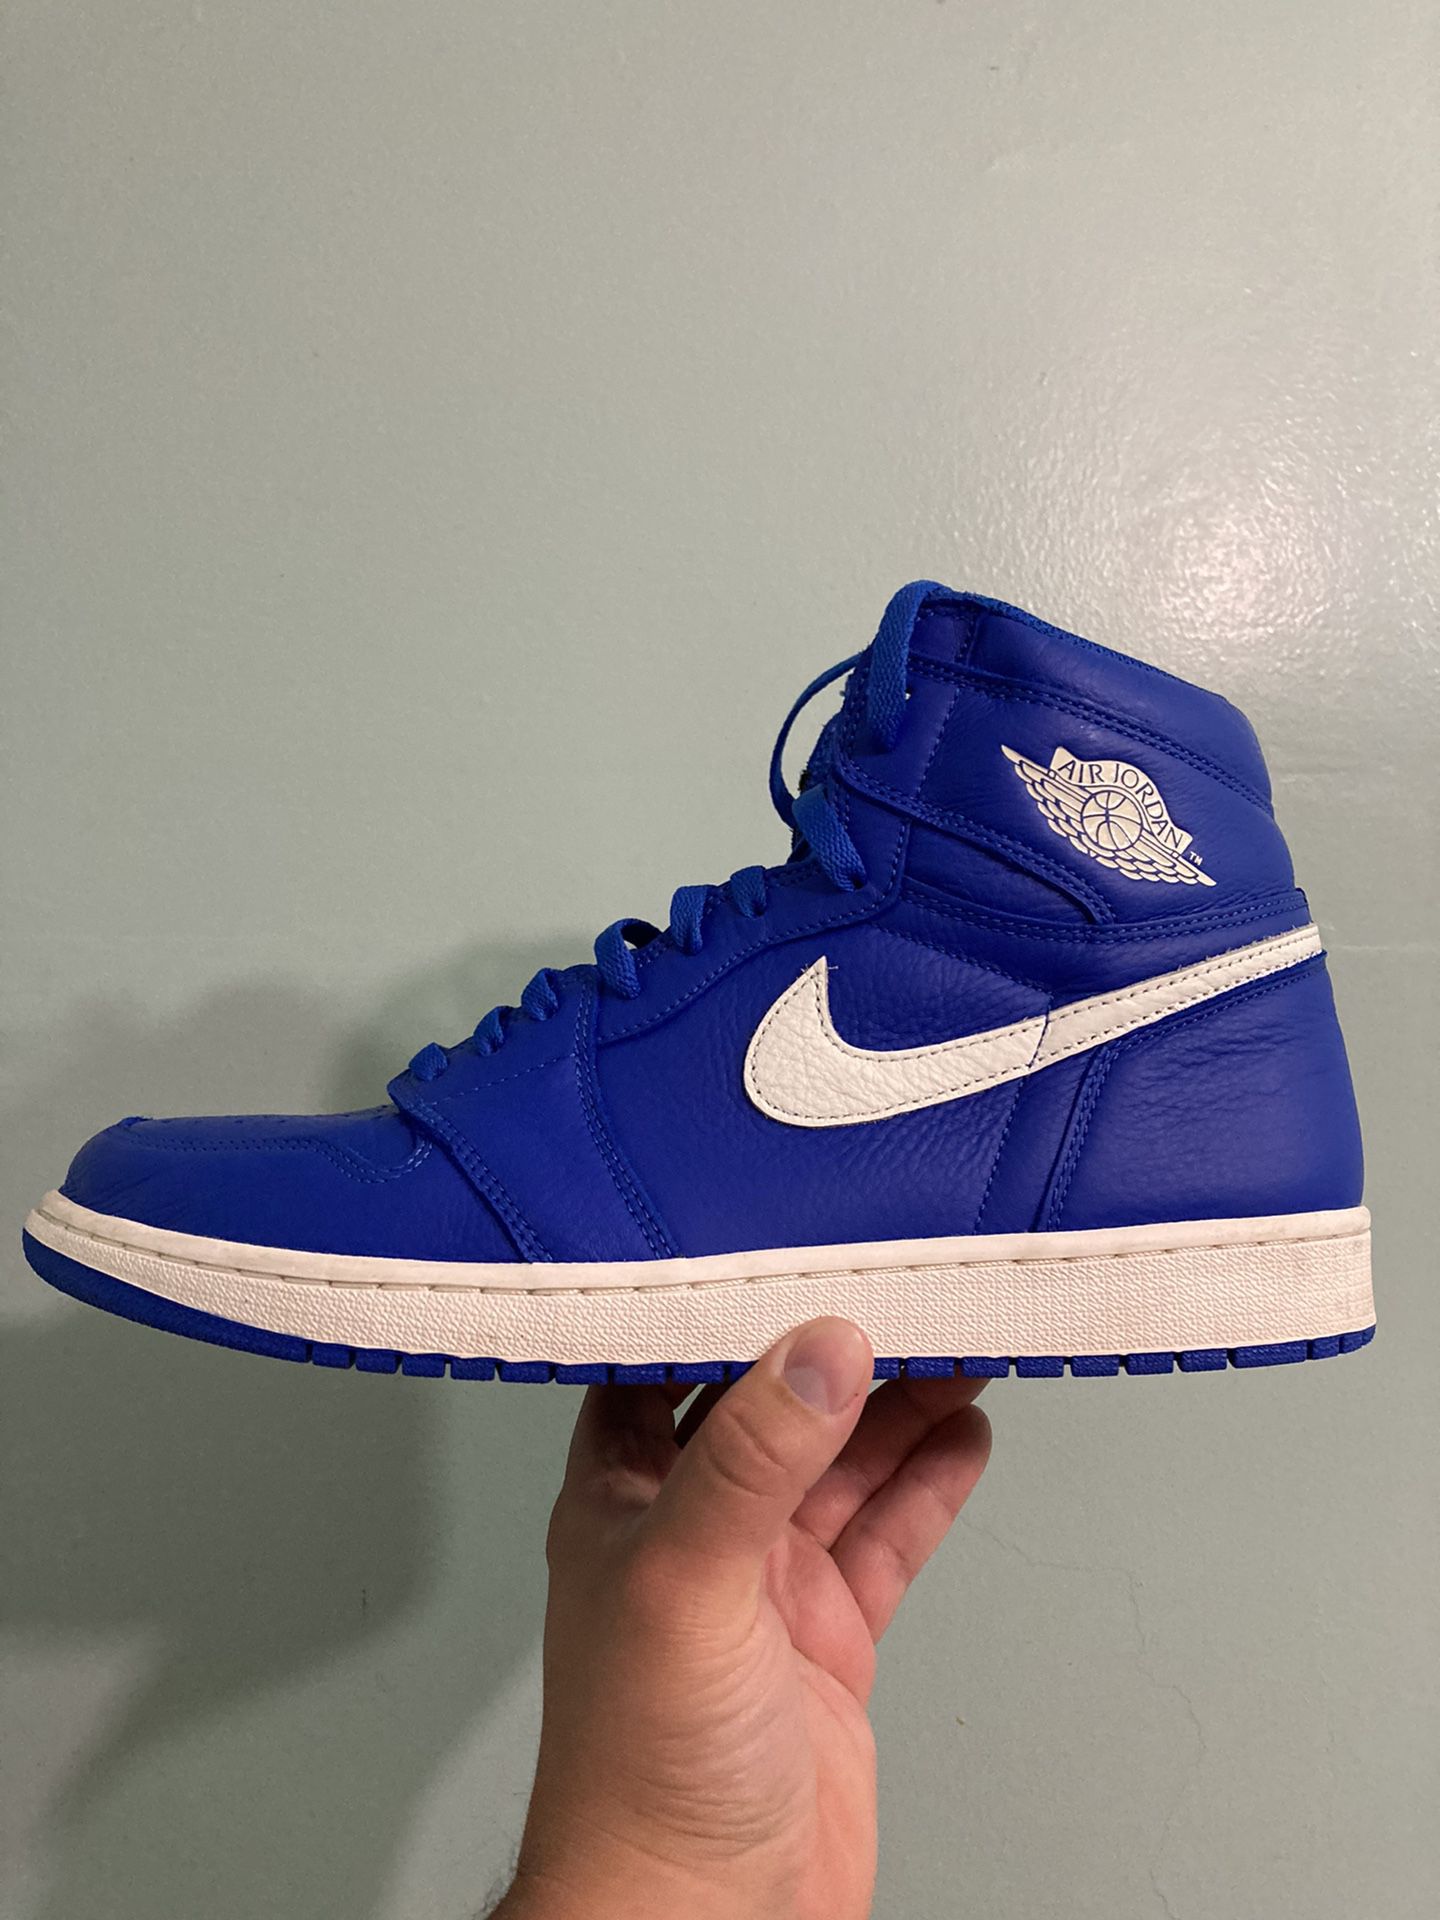 Jordan 1 high “Hyper royal” size (12). In men’s. Worn in excellent condition, comes with OG all. $155 takes today! No tardes. Picked up in Providence.